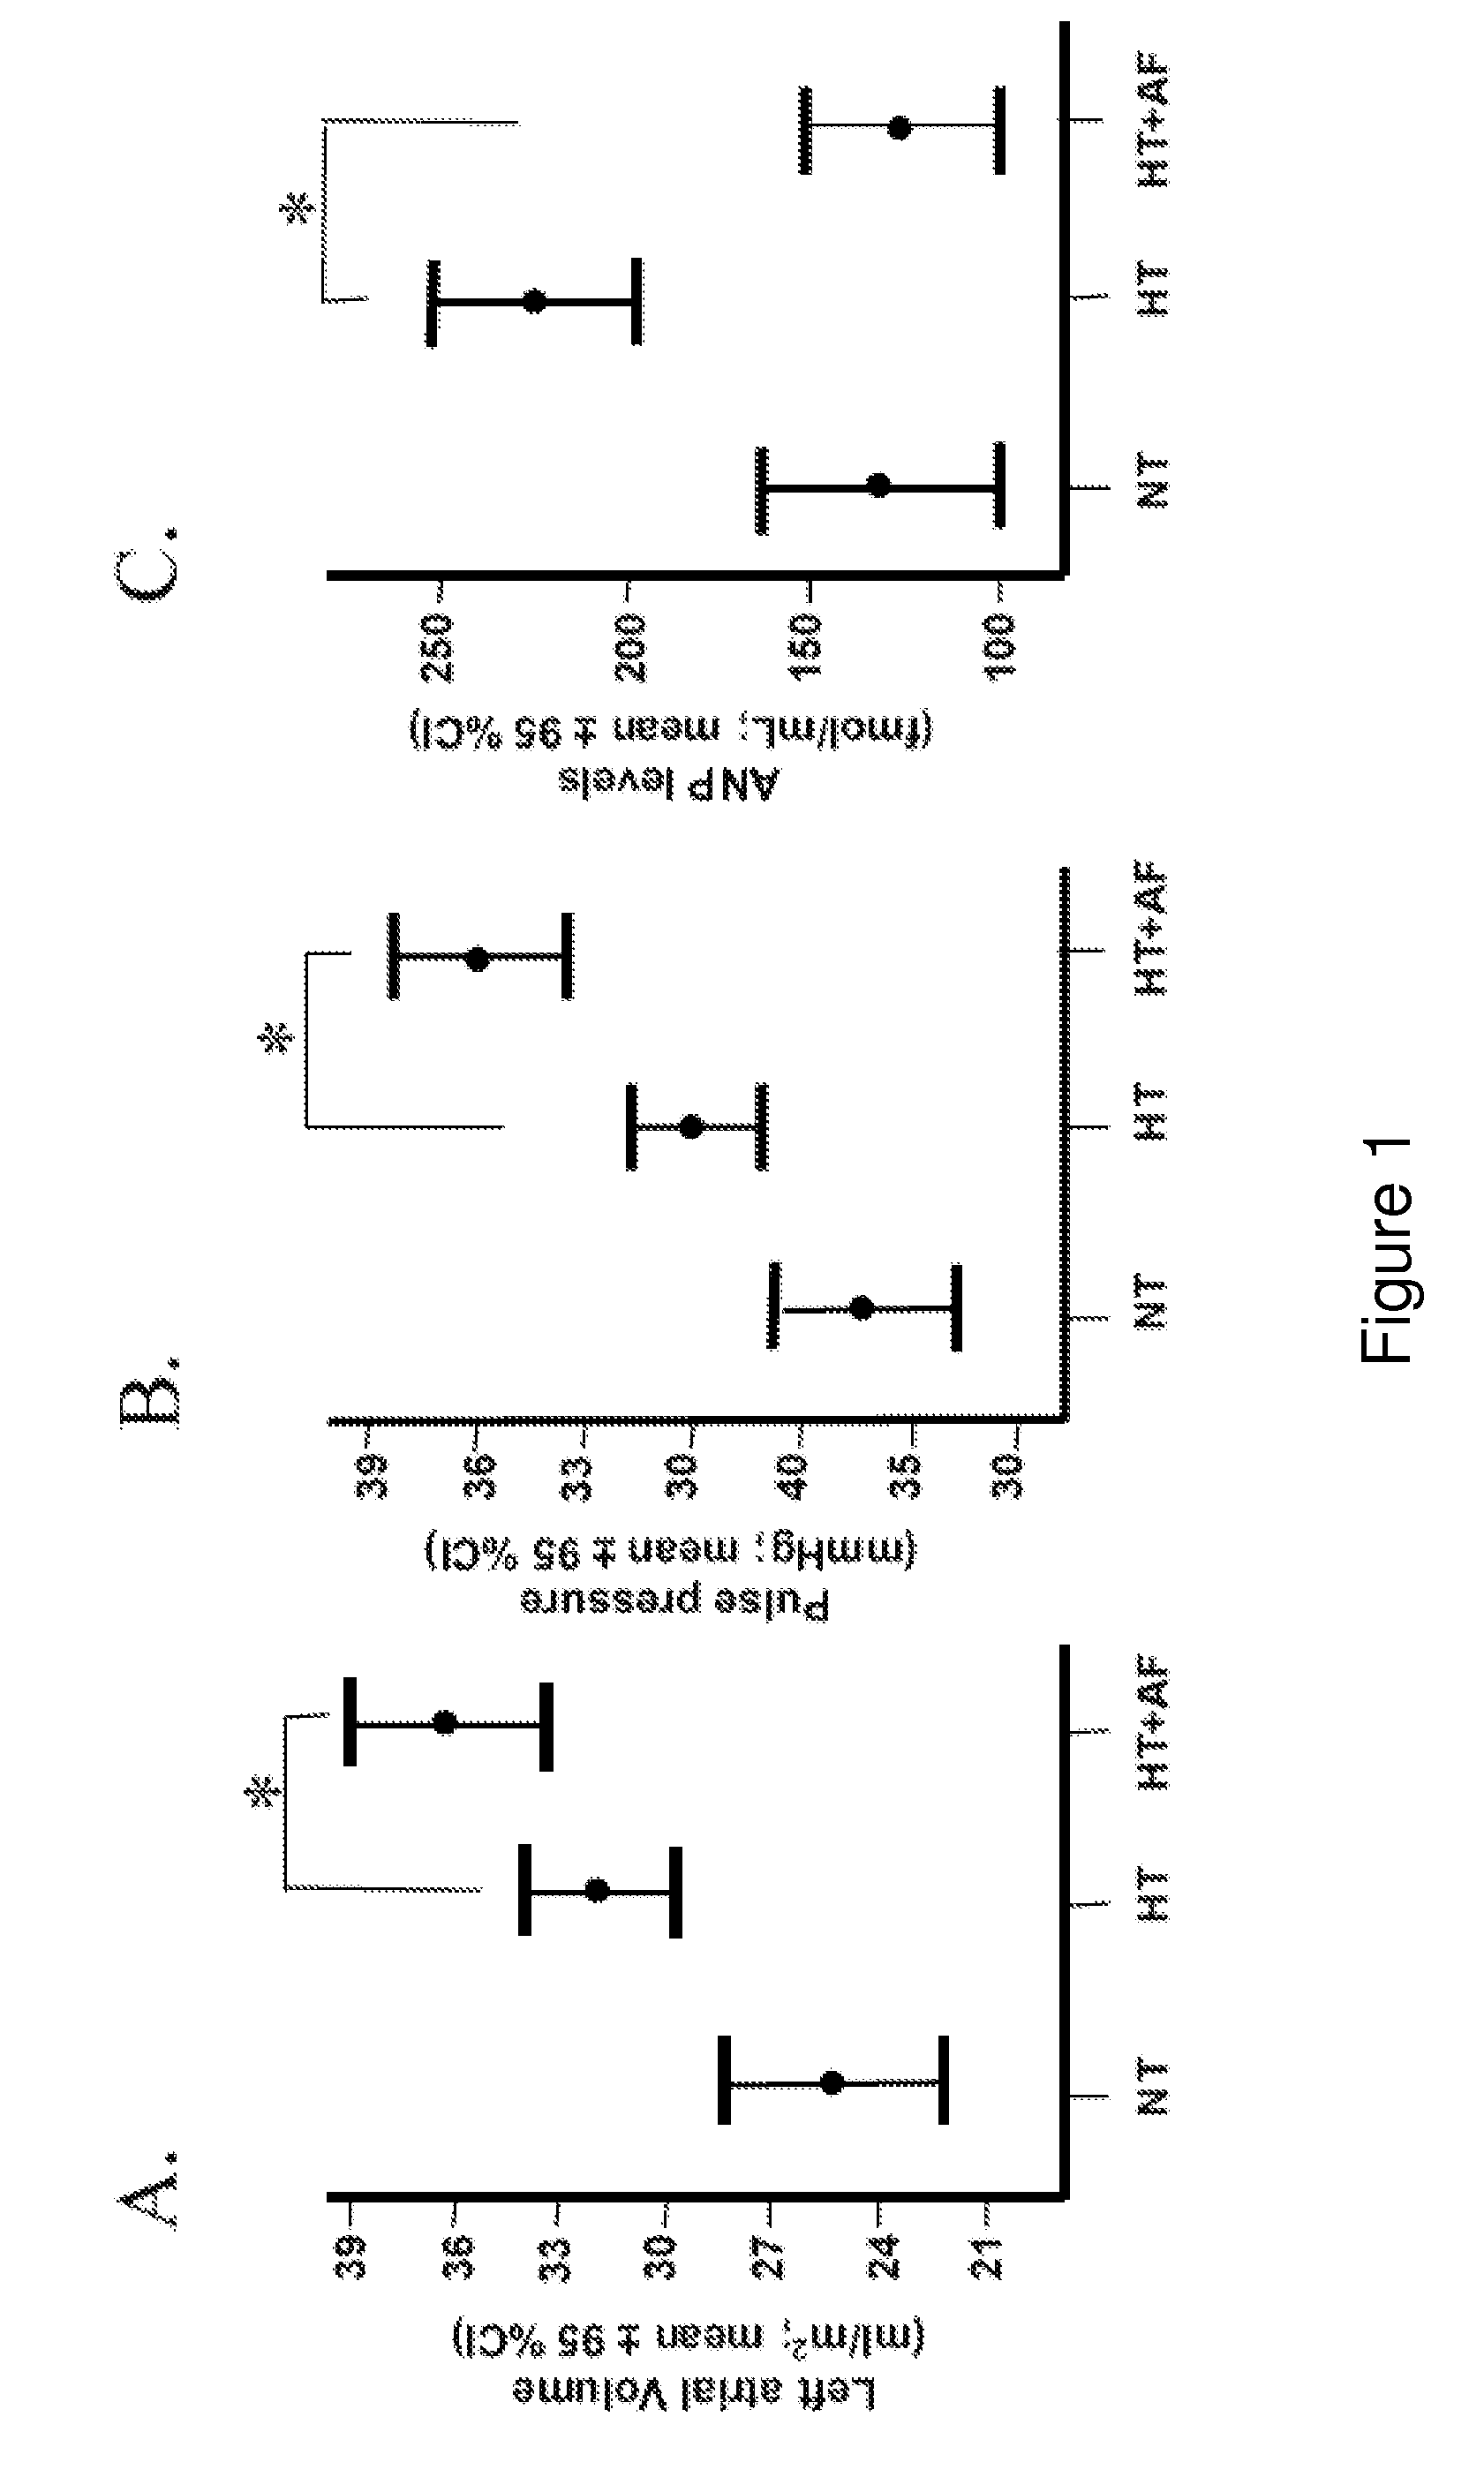 Method of determining a predisposition to atrial fibrillation (AF) in a subject